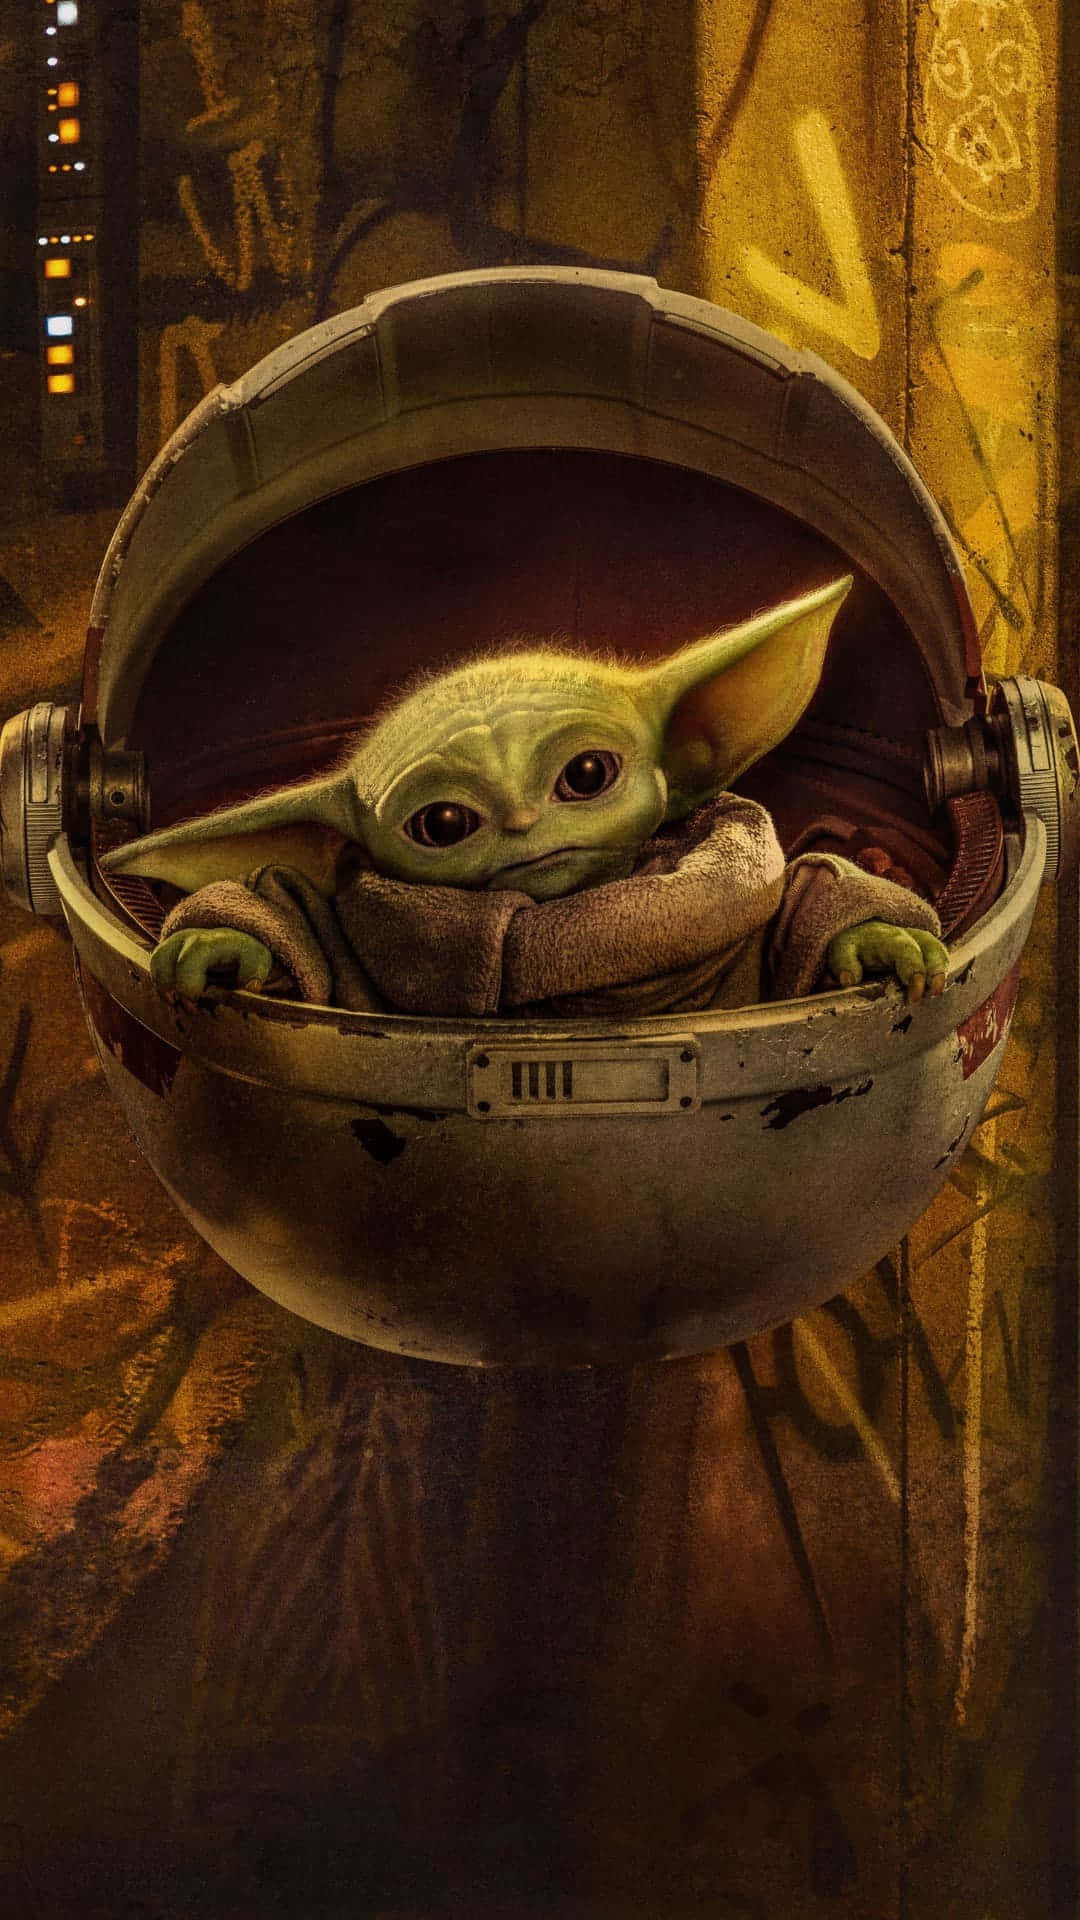 Get the official Baby Yoda phone to join his adventures! Wallpaper